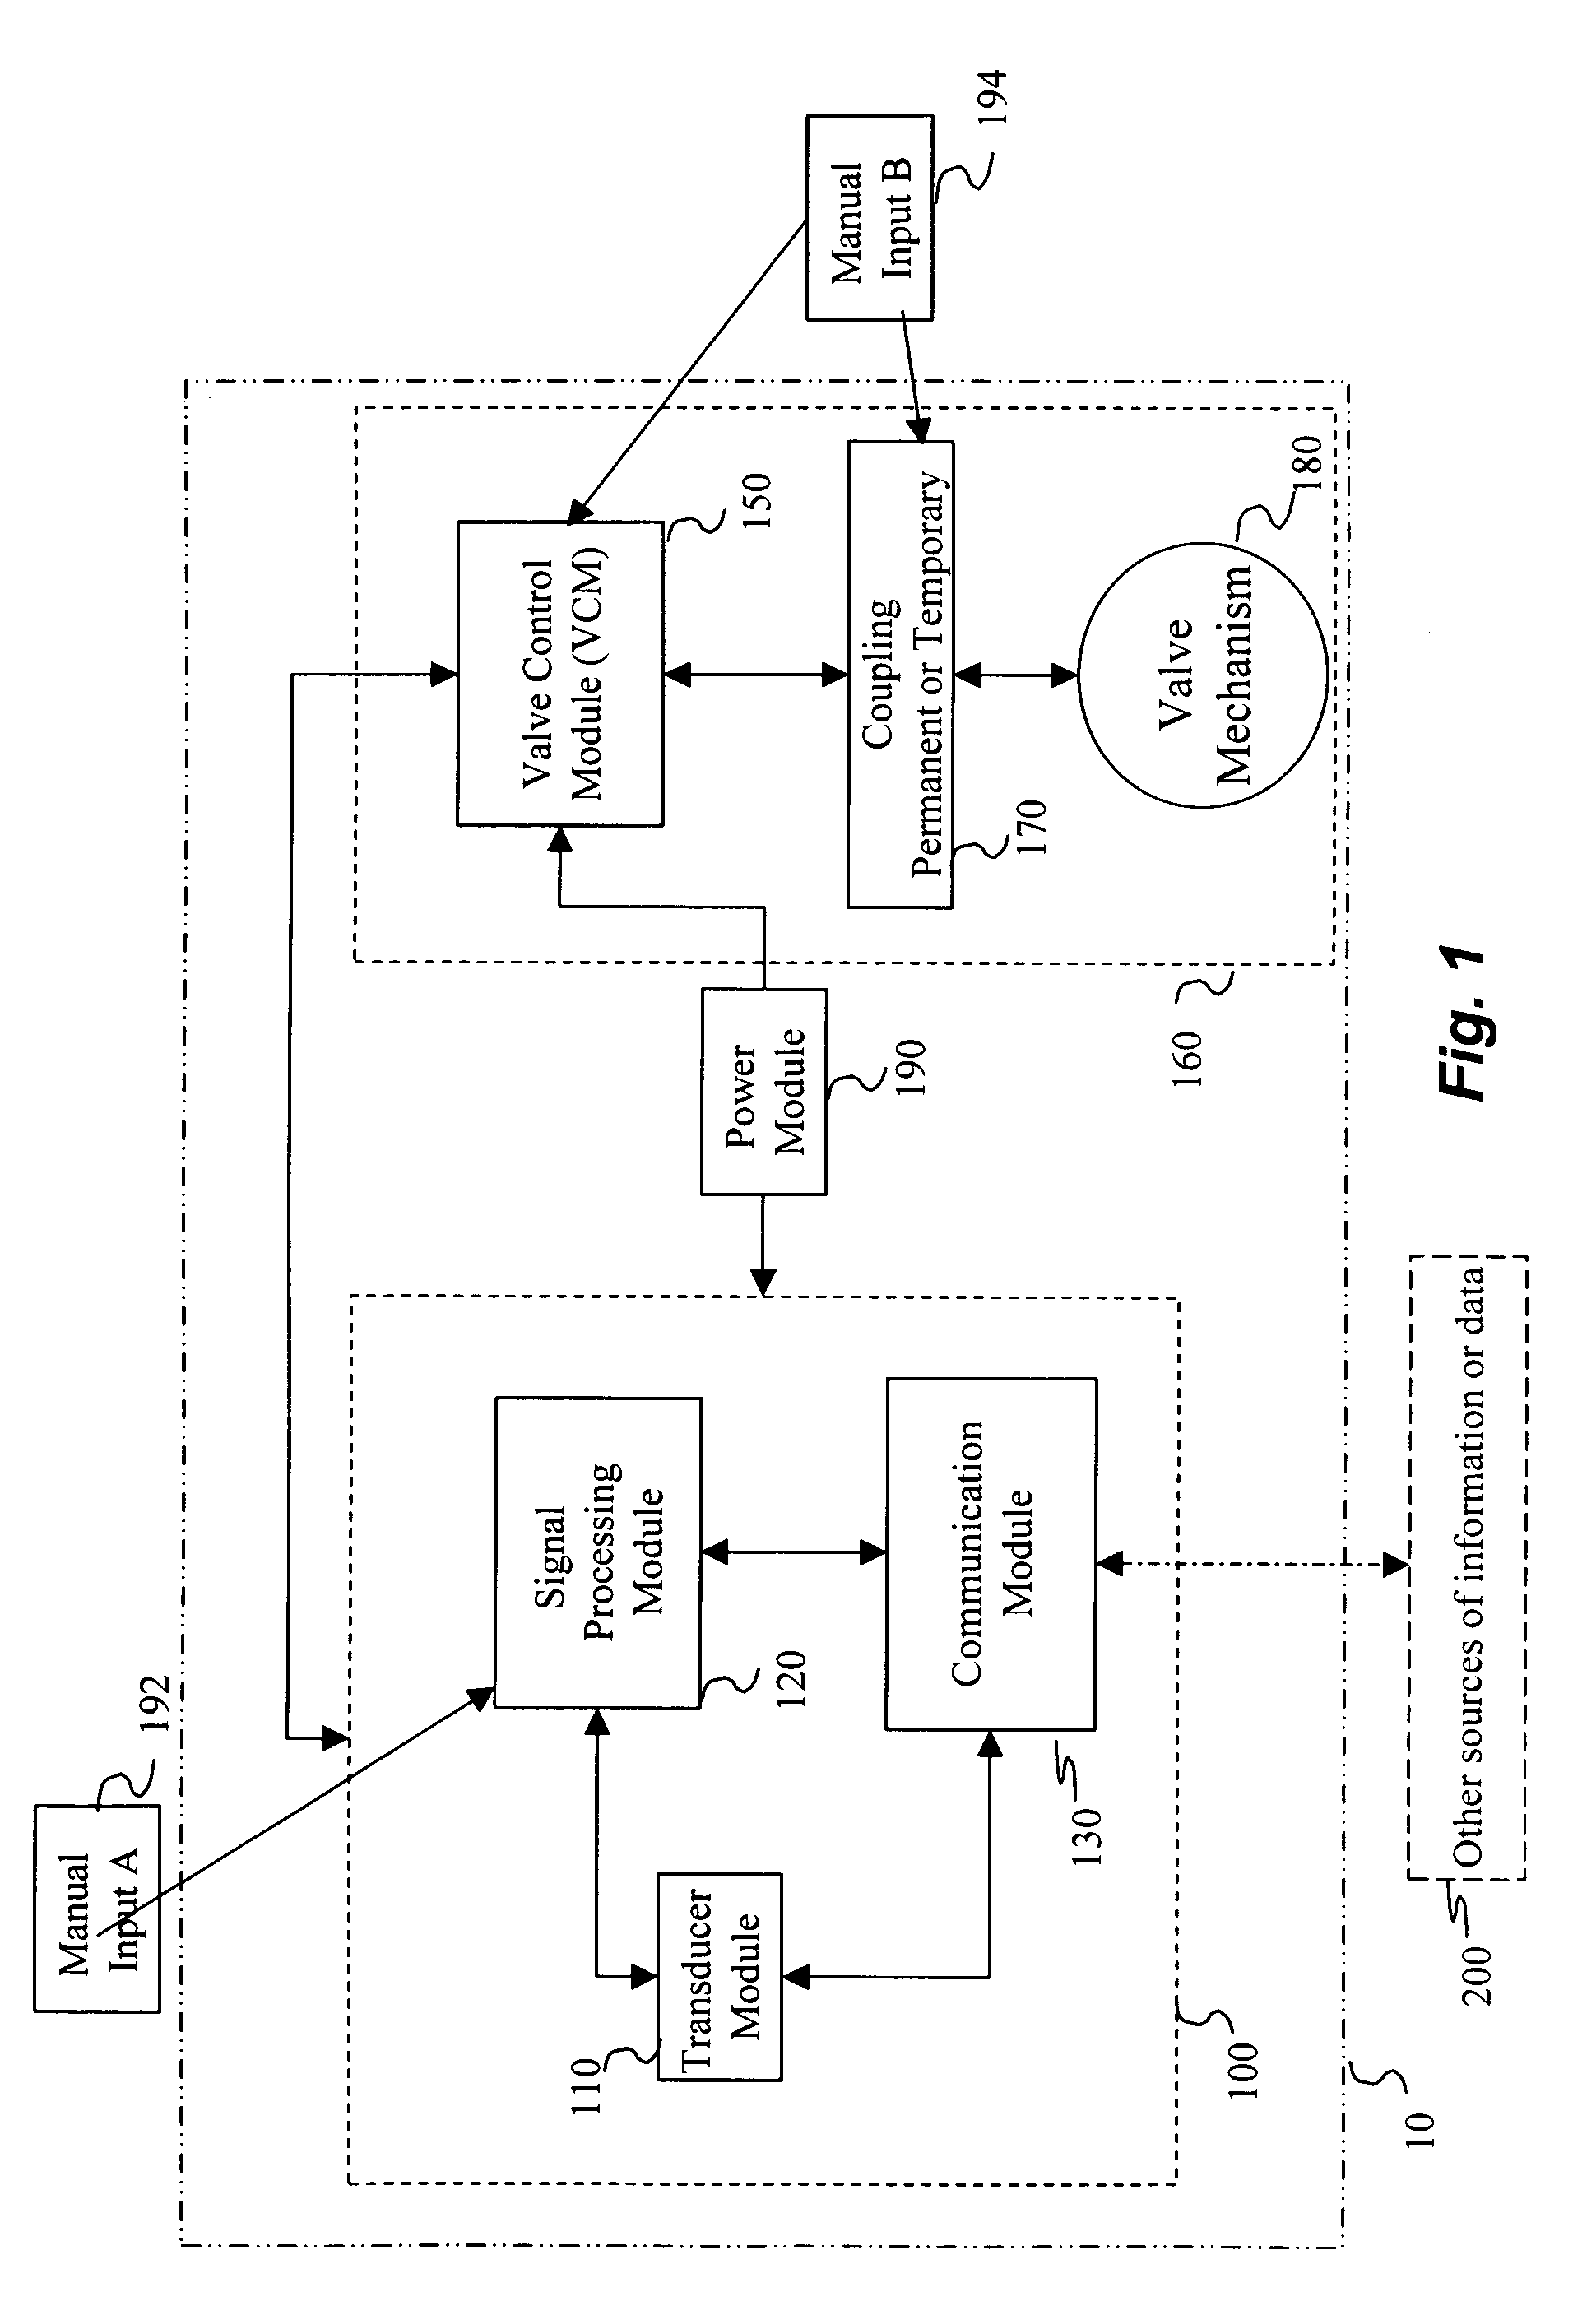 Intelligent valve control methods and systems